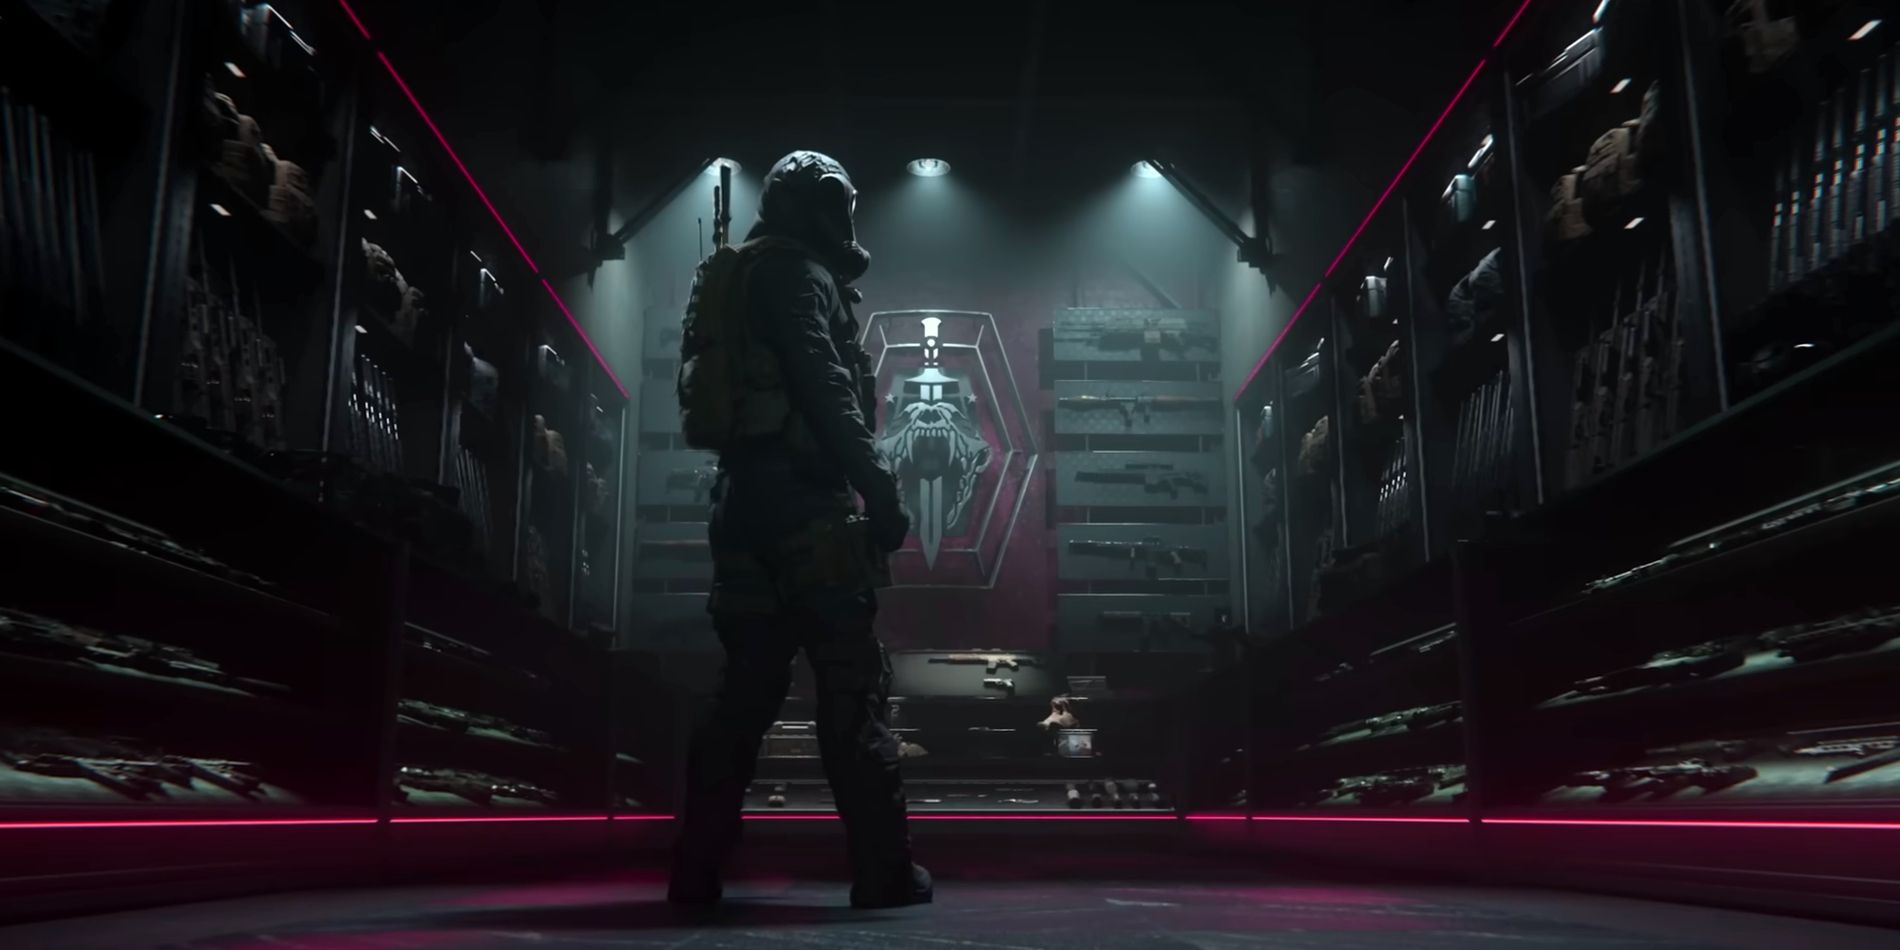 Screenshot from MW3 multiplayer trailer shows a masked soldier standing in the middle of an armory filled with a wide selection of guns and war gear.